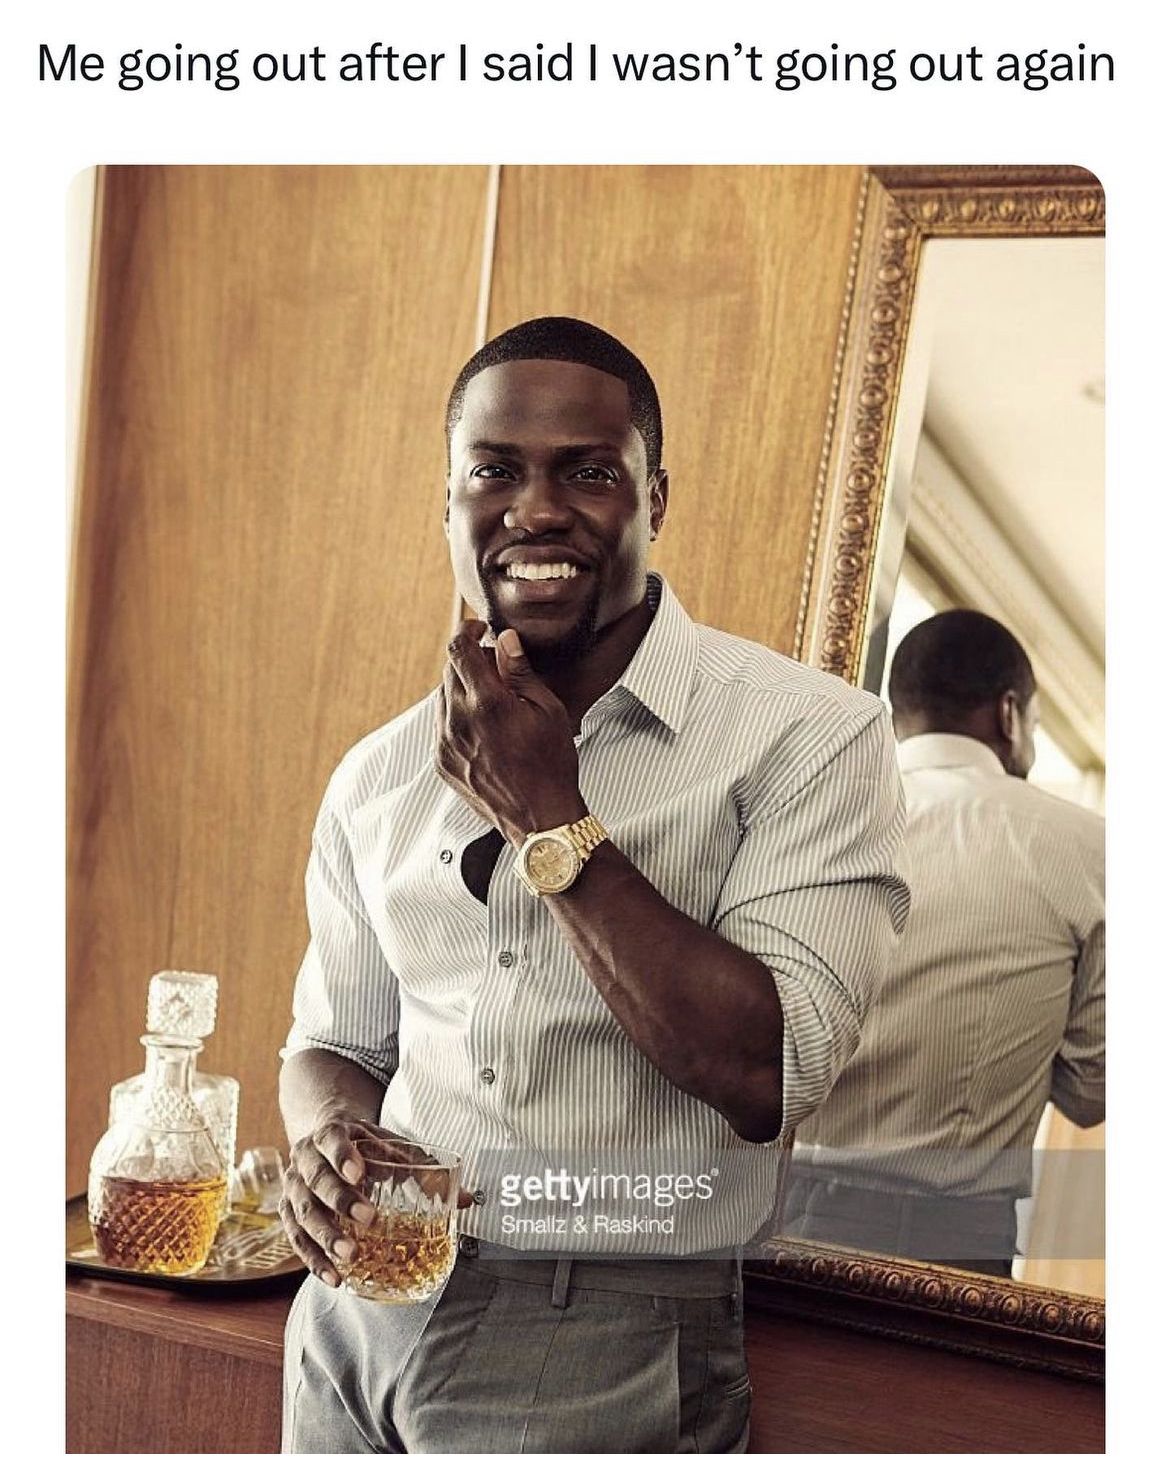 Kevin Hart trending memes - kevin hart outfit - Me going out after I said I wasn't going out again gettyimages Small & Raskind